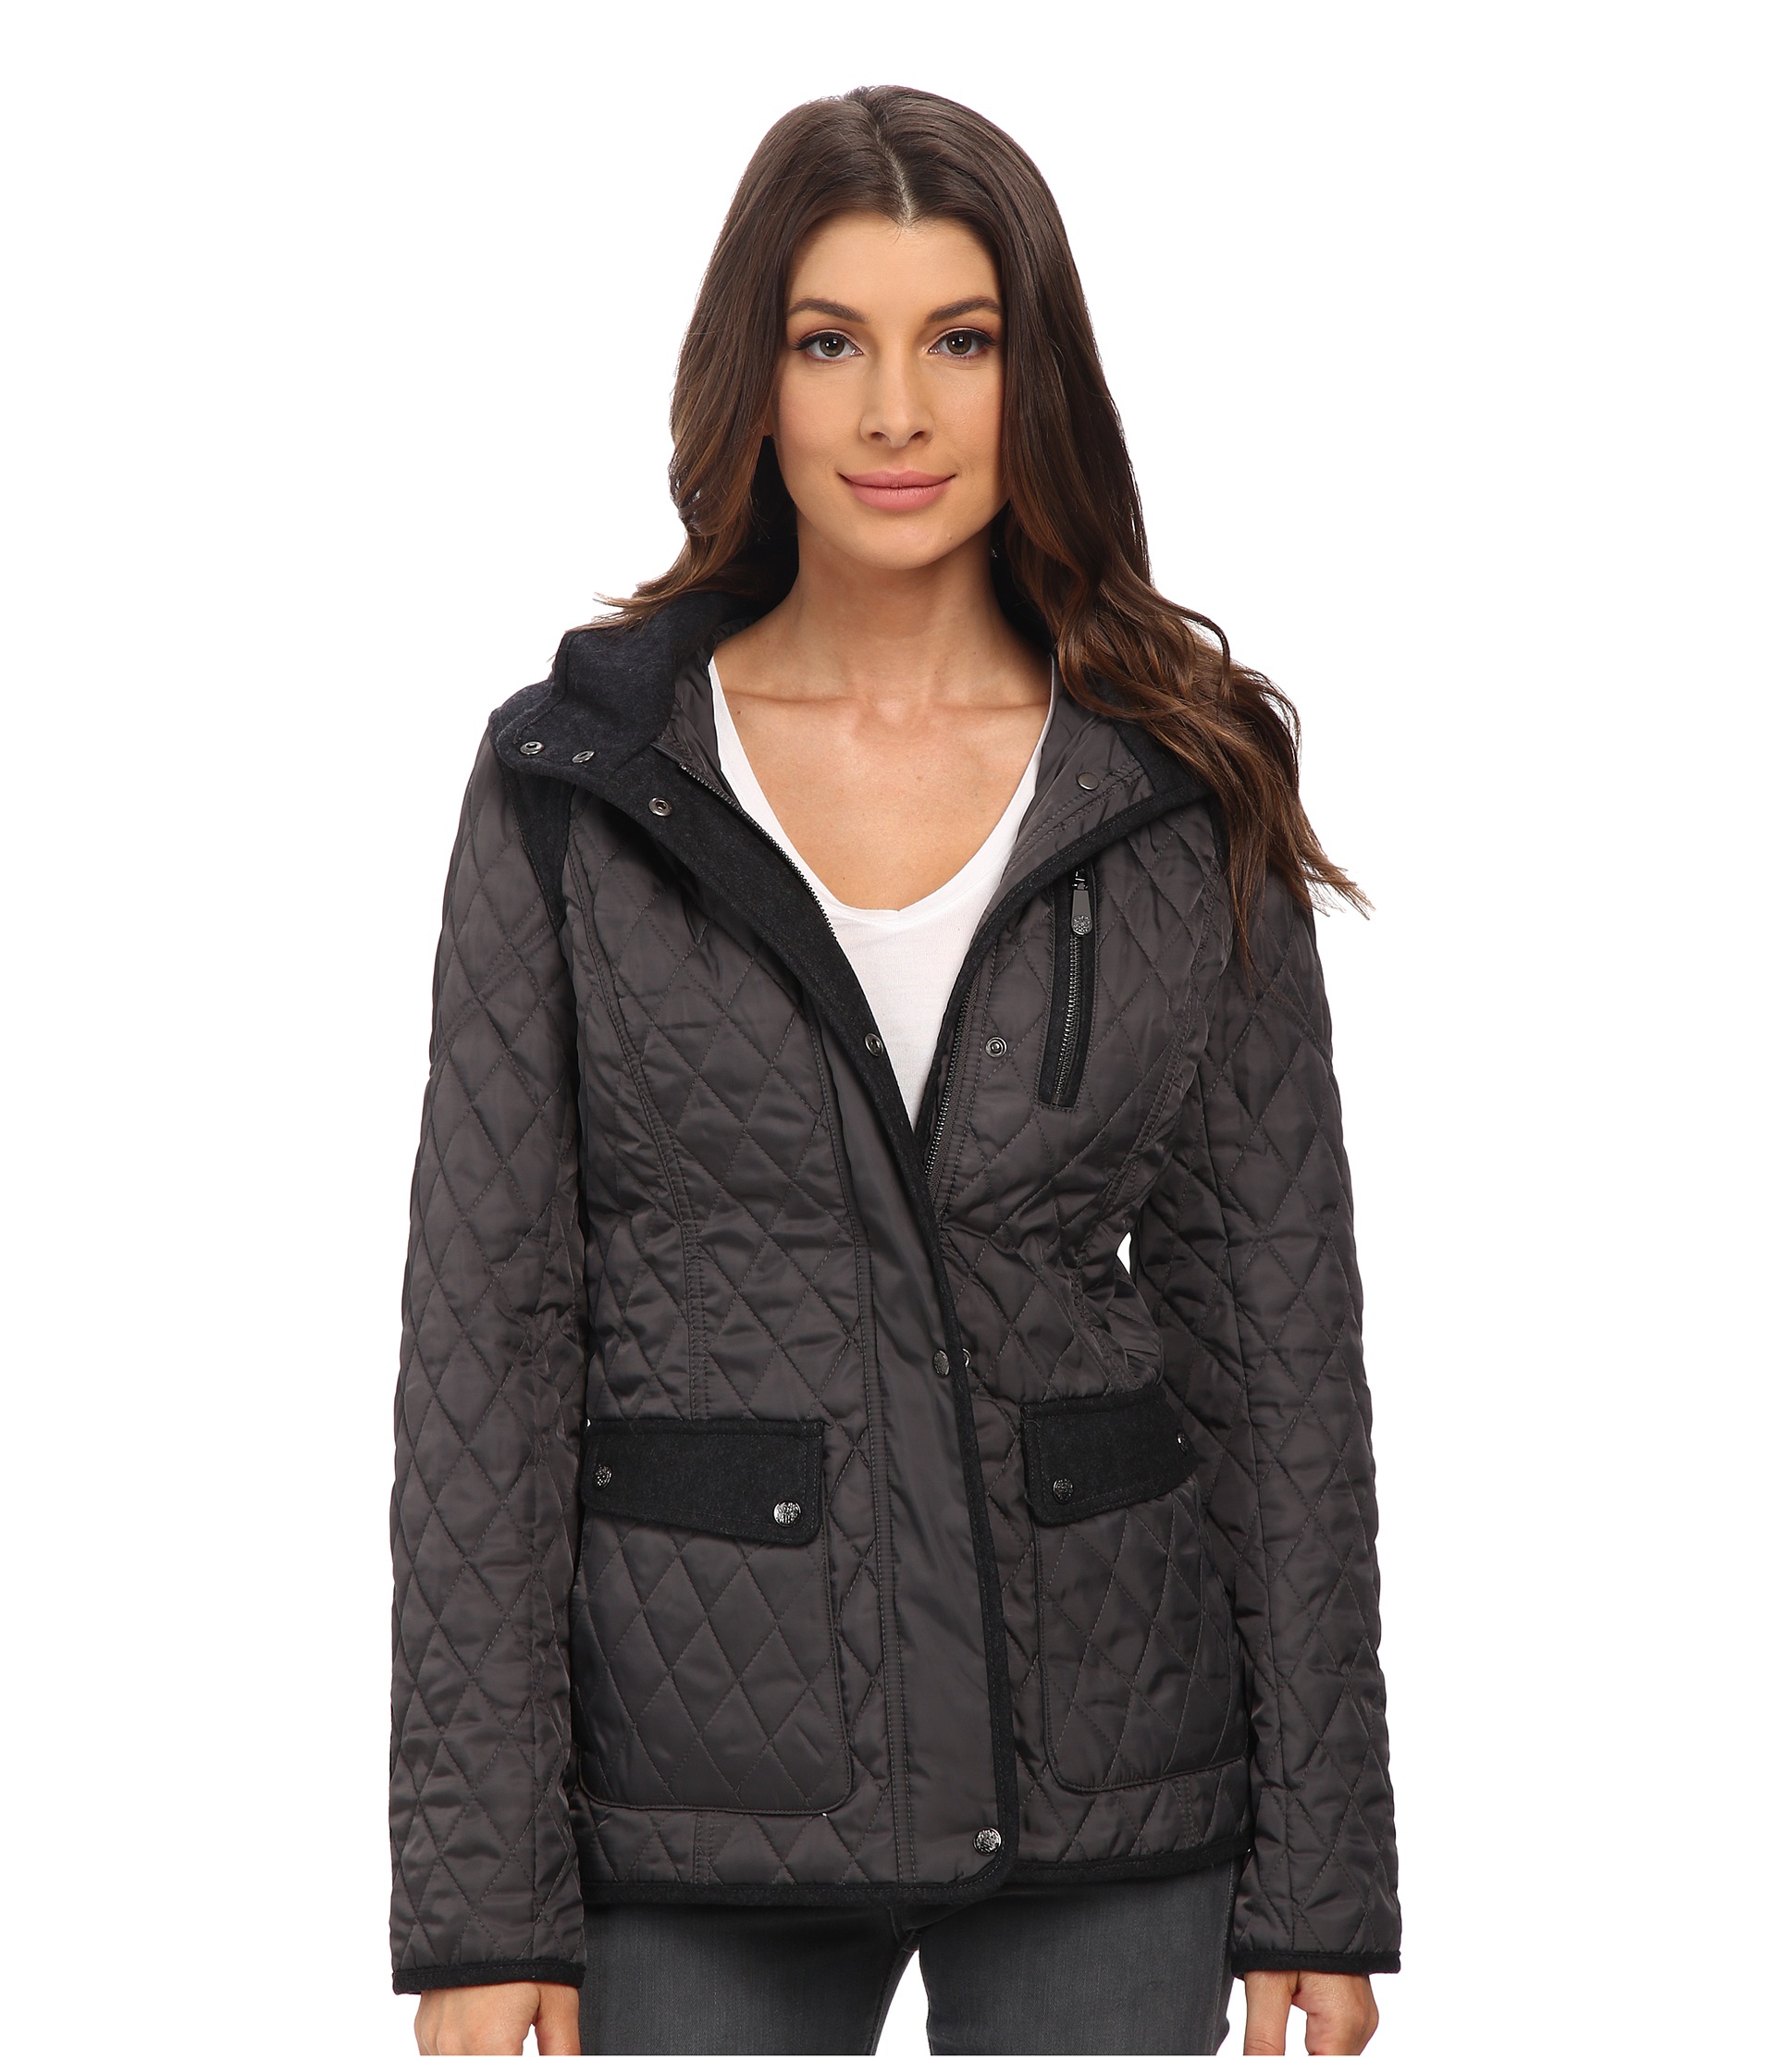 Vince Camuto Quilted Jacket with Wool Trim J1501 Iron - Zappos.com Free ...